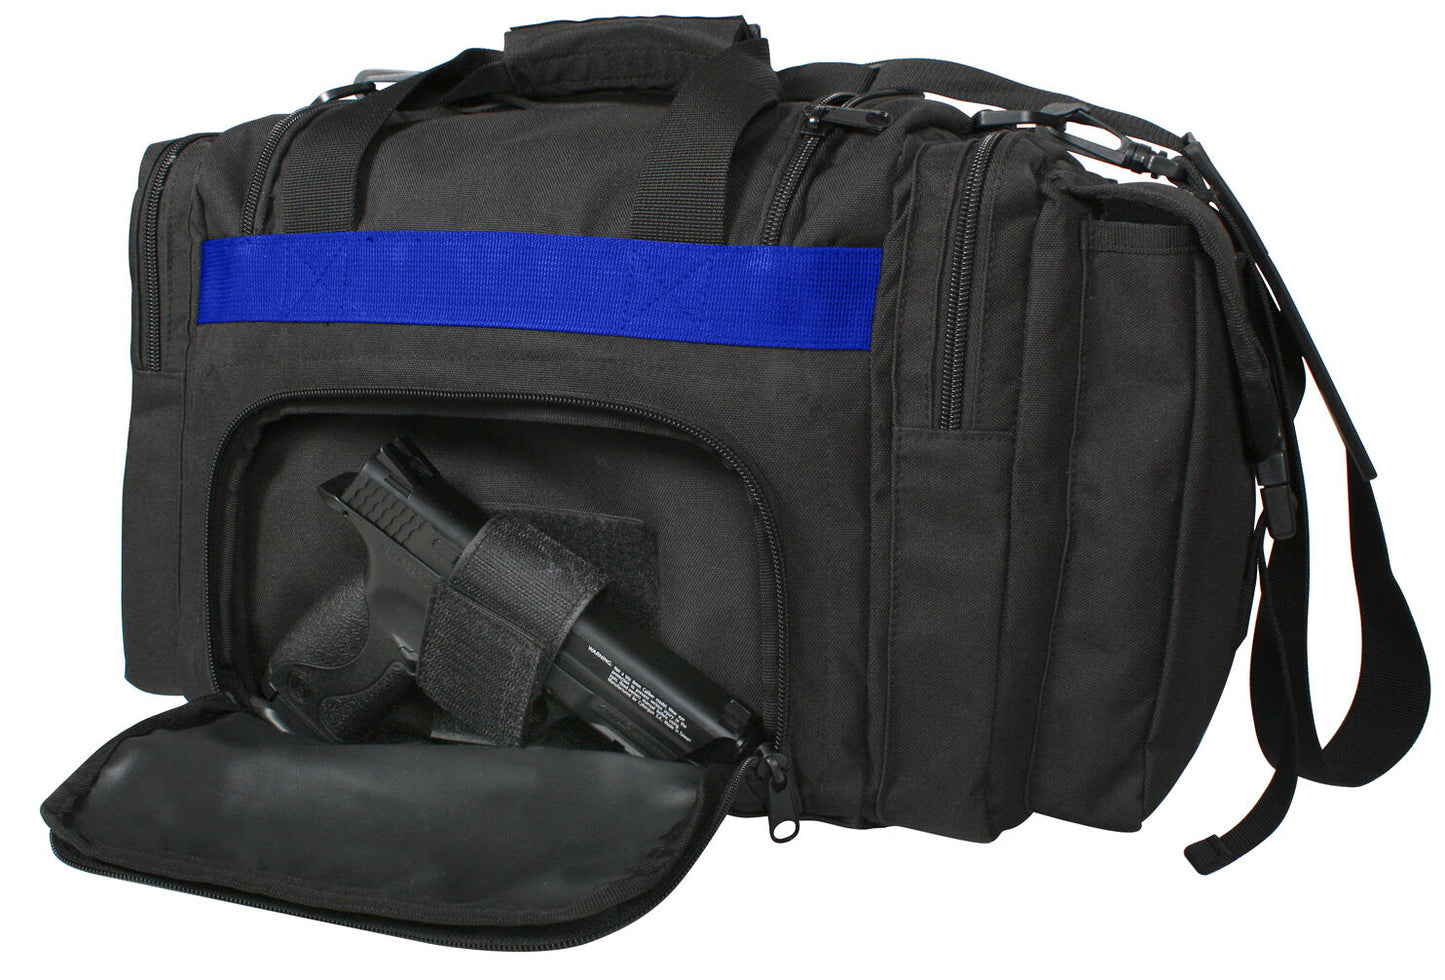 Rothco Thin Blue Line Concealed Carry Range Bag - Black